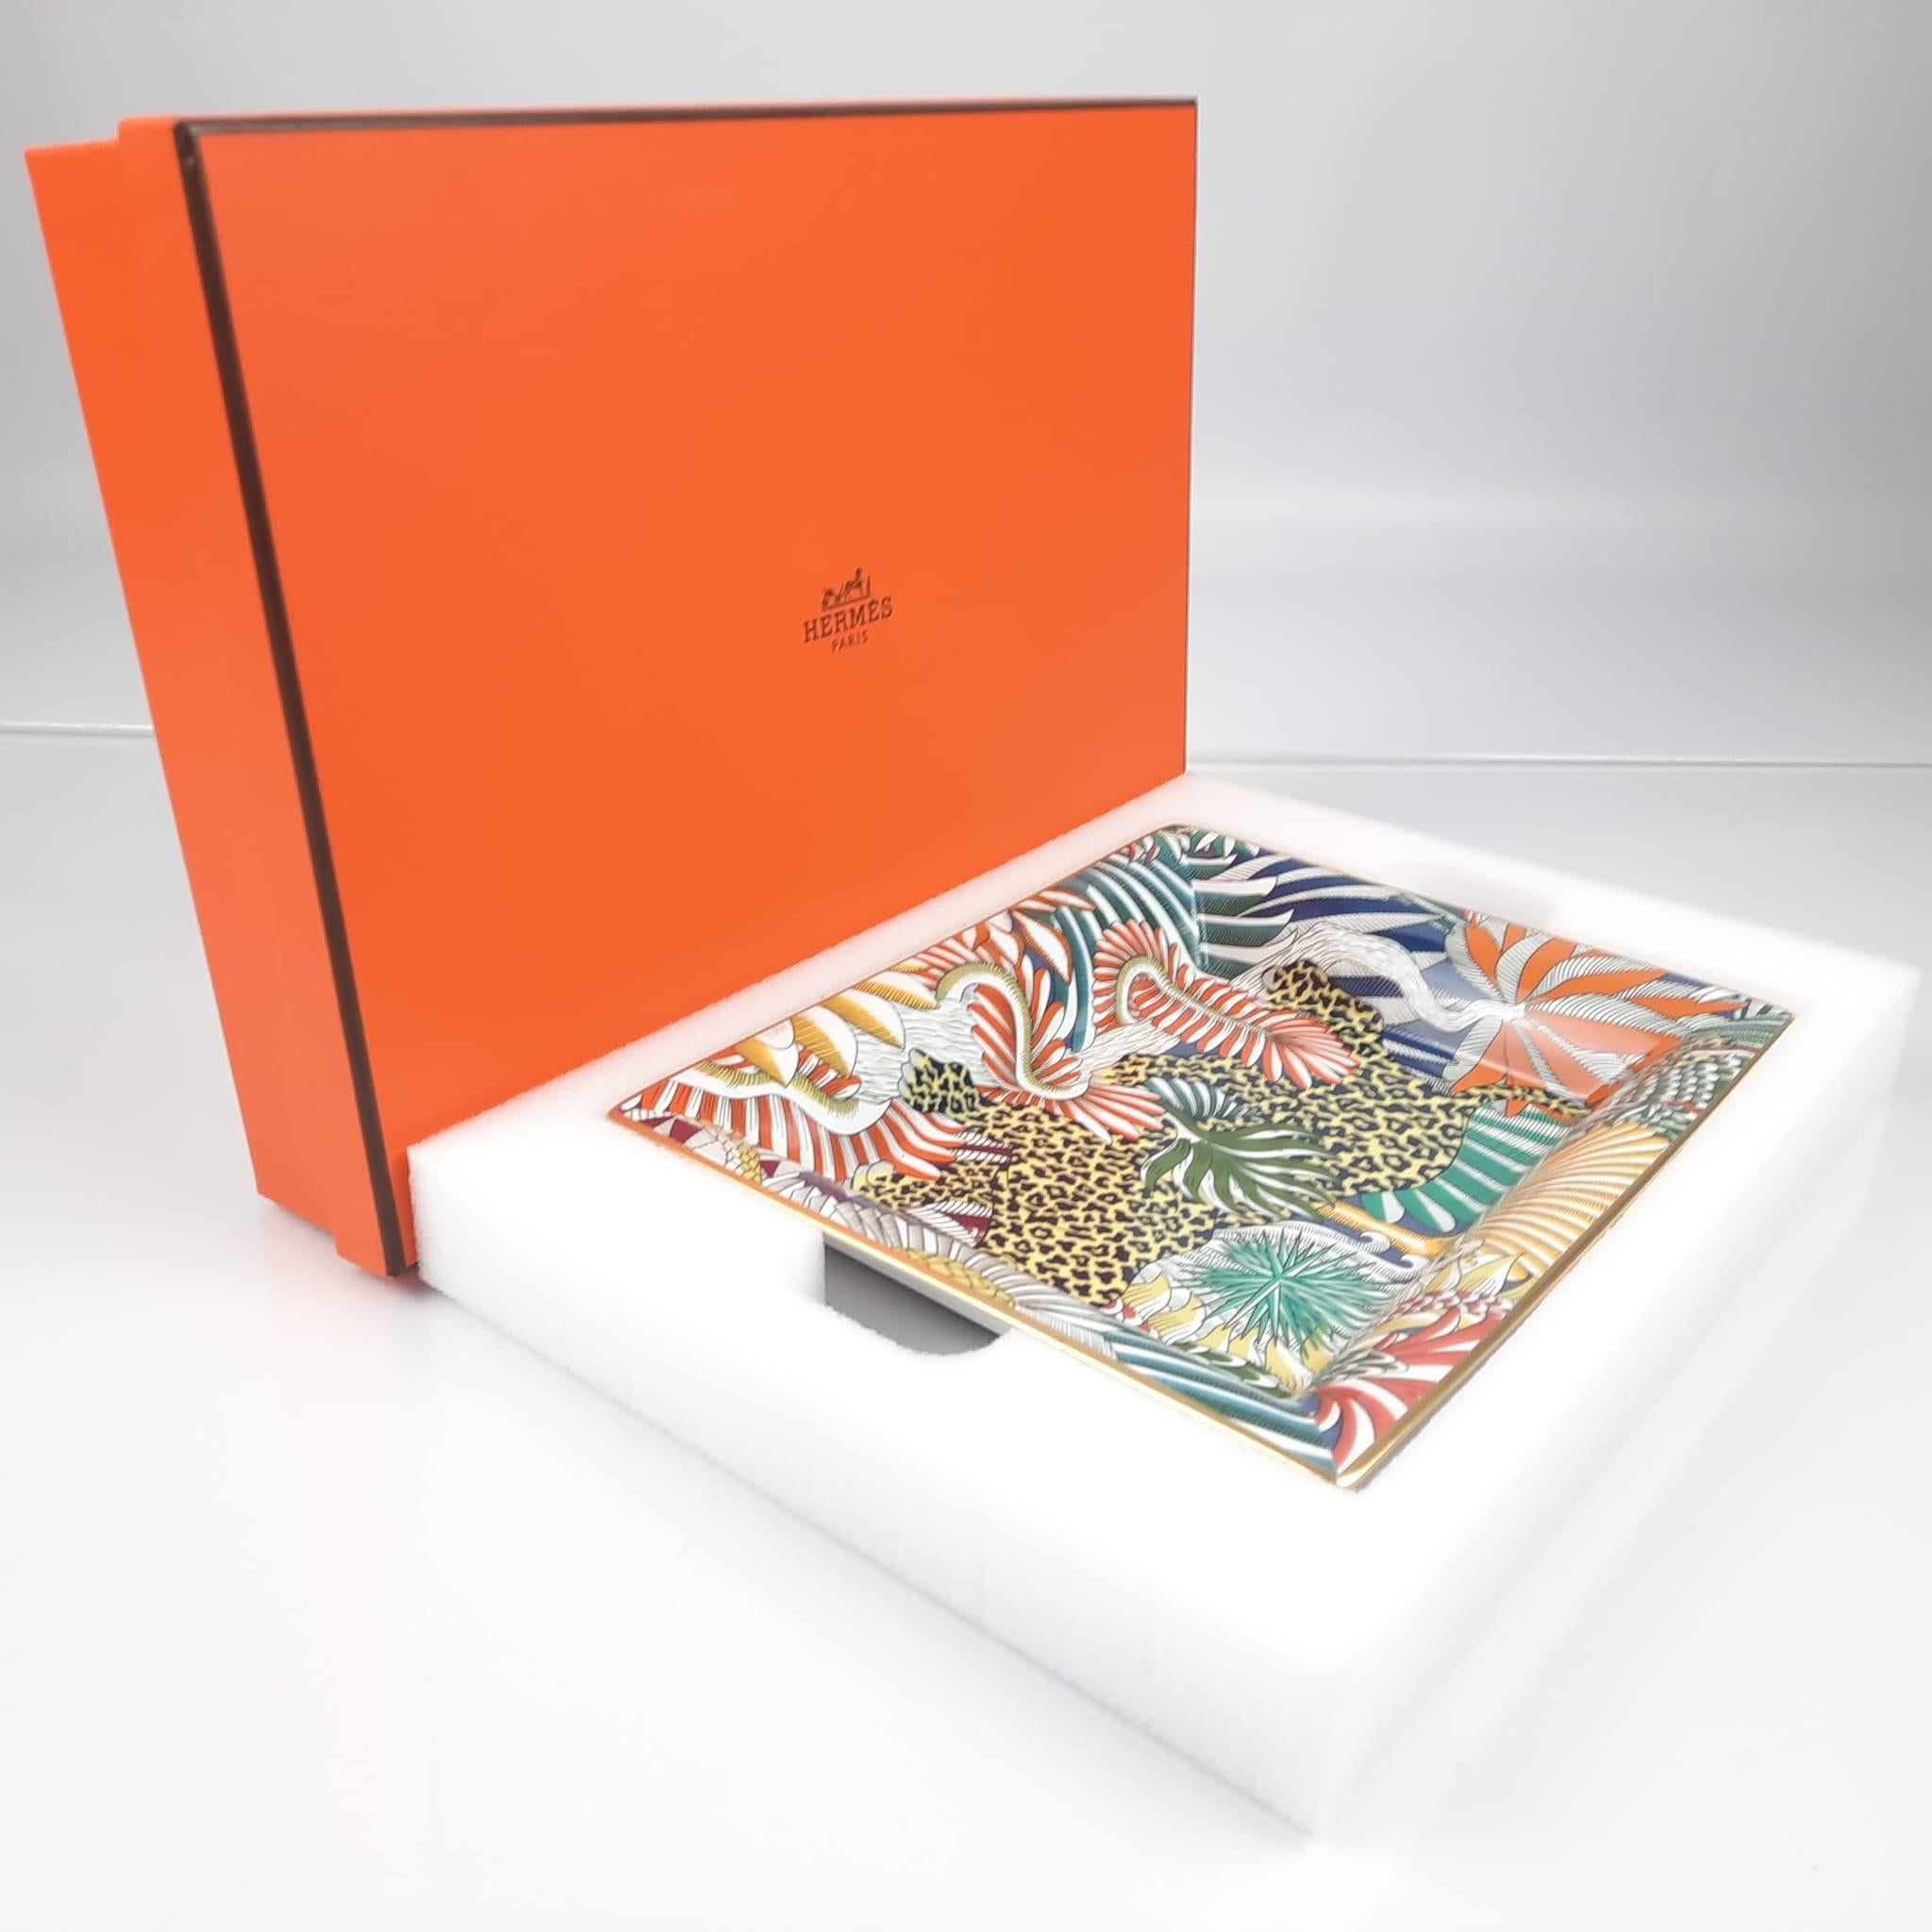 Hermes Végétal Animaux Camoufles change tray 1